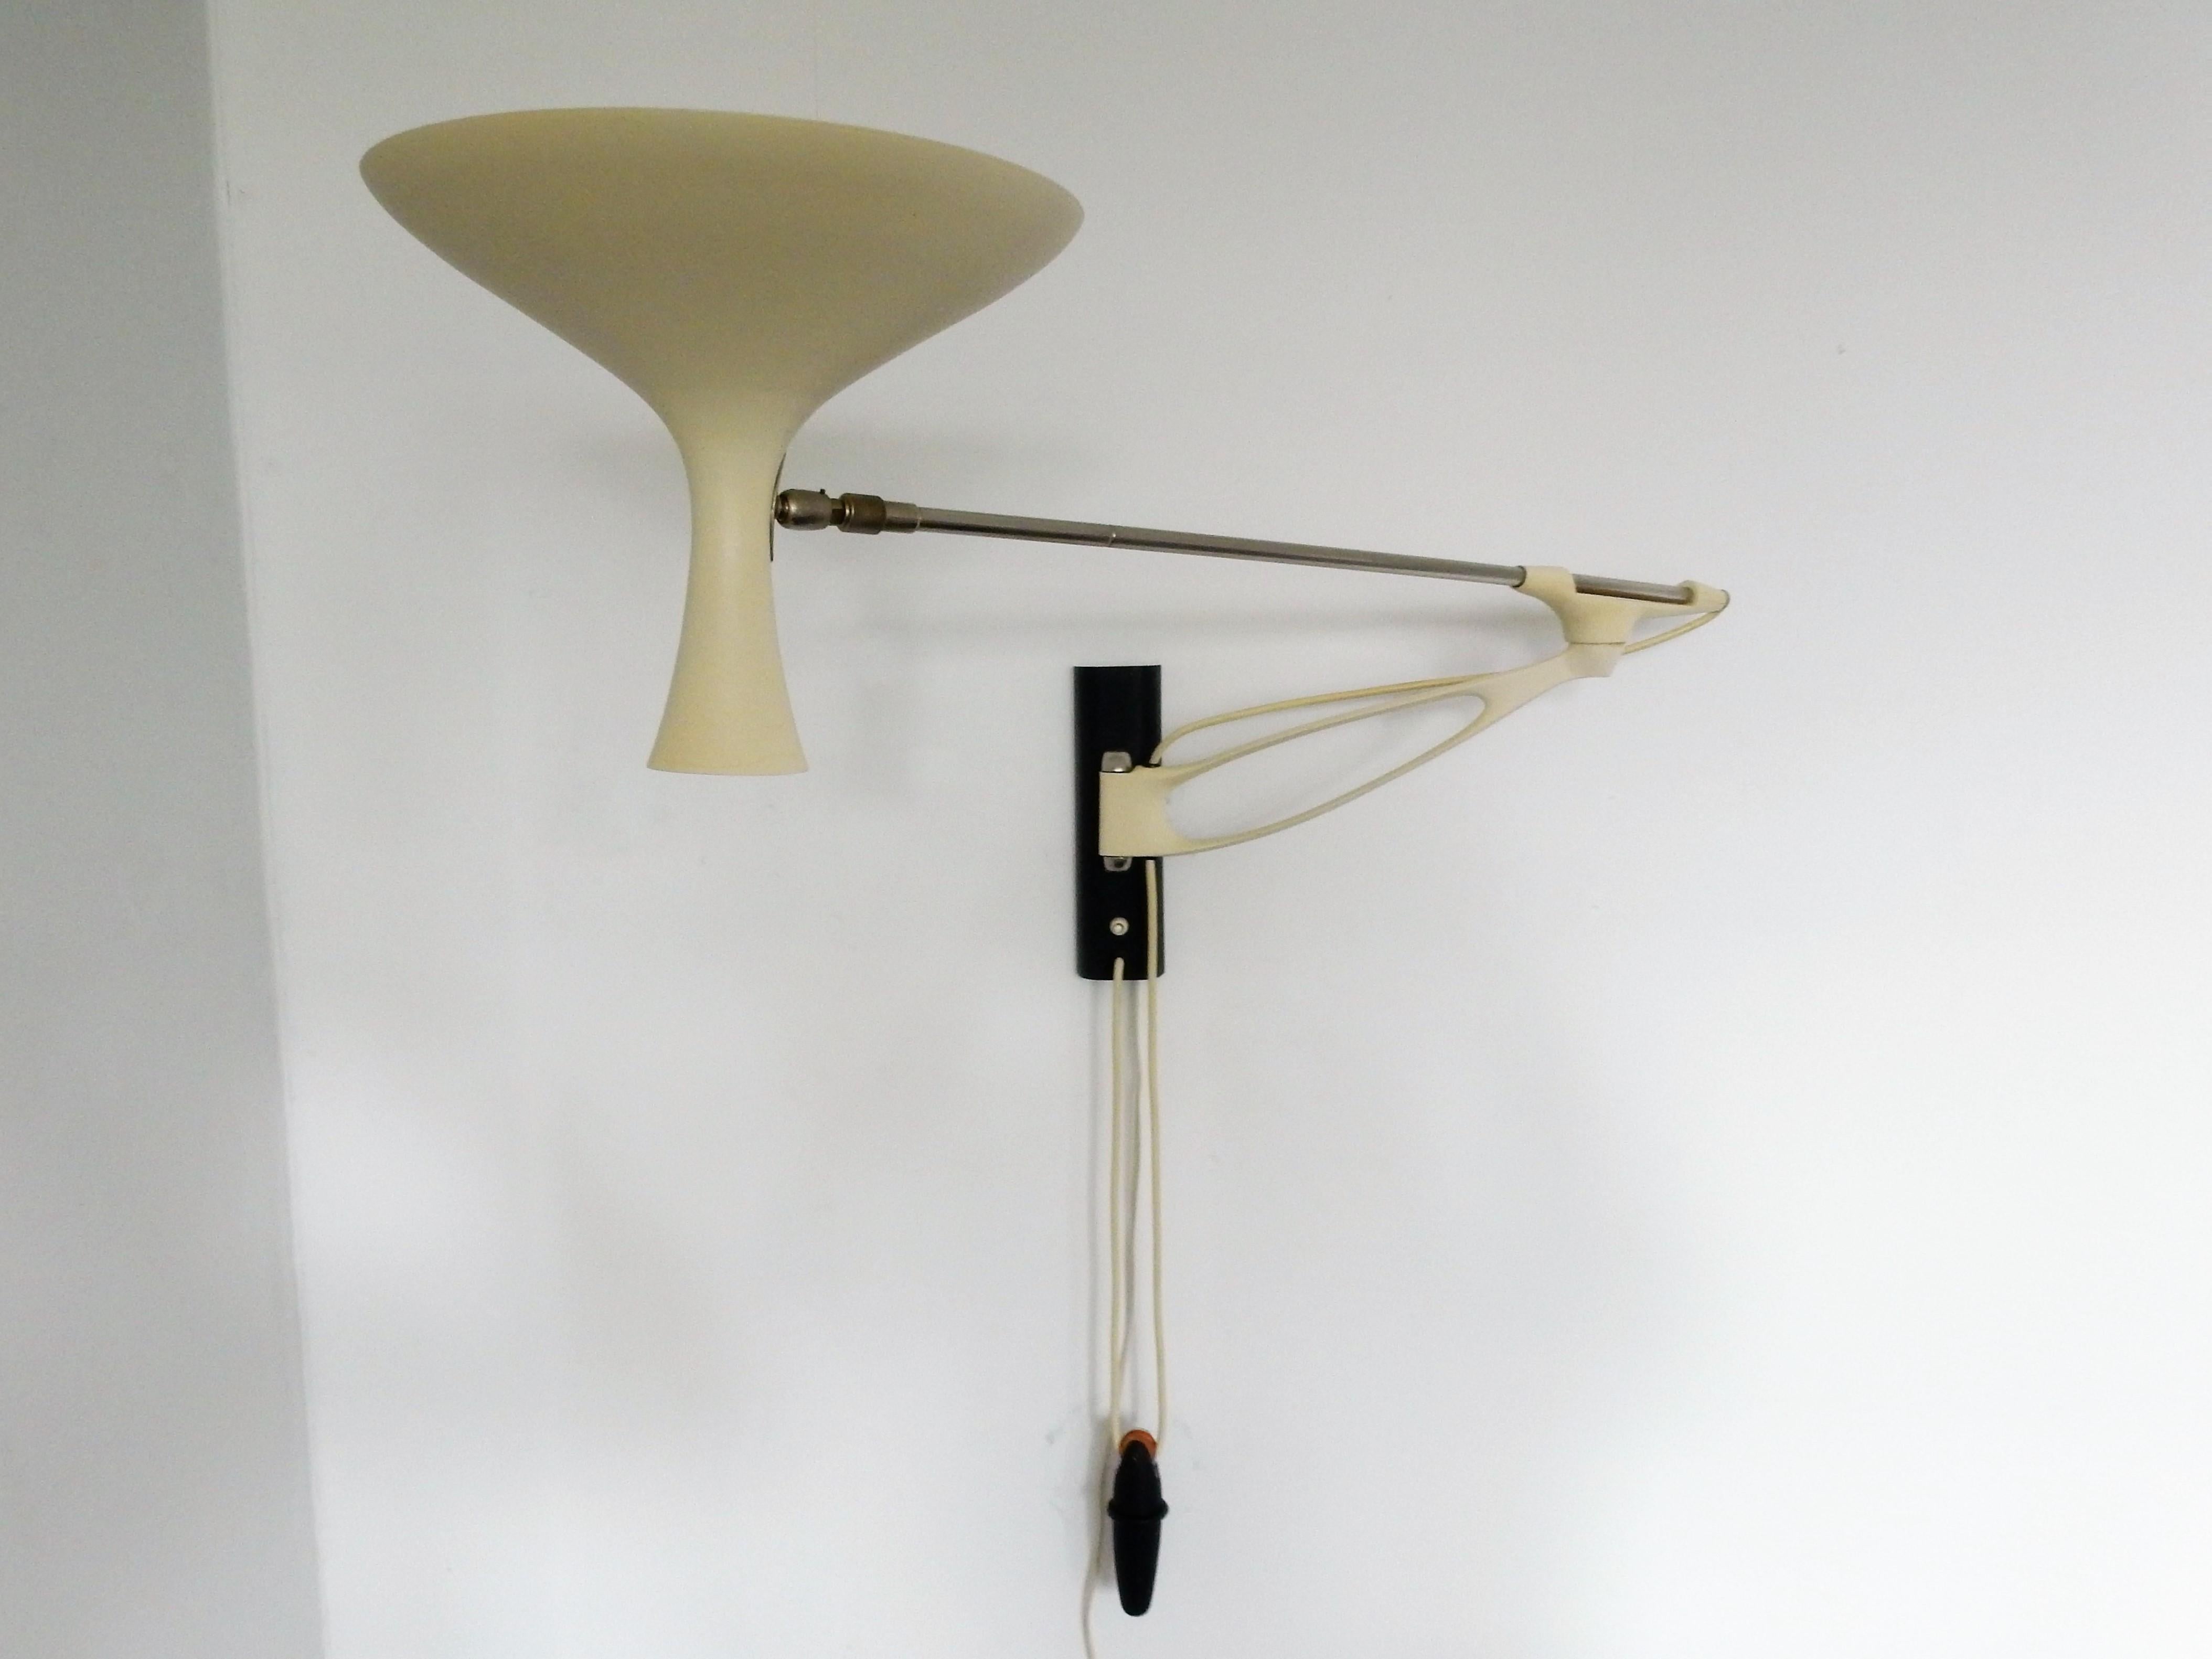 This stunning and quite rare adjustable wall lamp, model 'Royal', was designed for Gebrüder Cosack in Germany in the 1950s. The diabolo shade is white enameled in a 'shrink finish', mounted on a telescoping arm. The lamp can be pulled out from 100cm